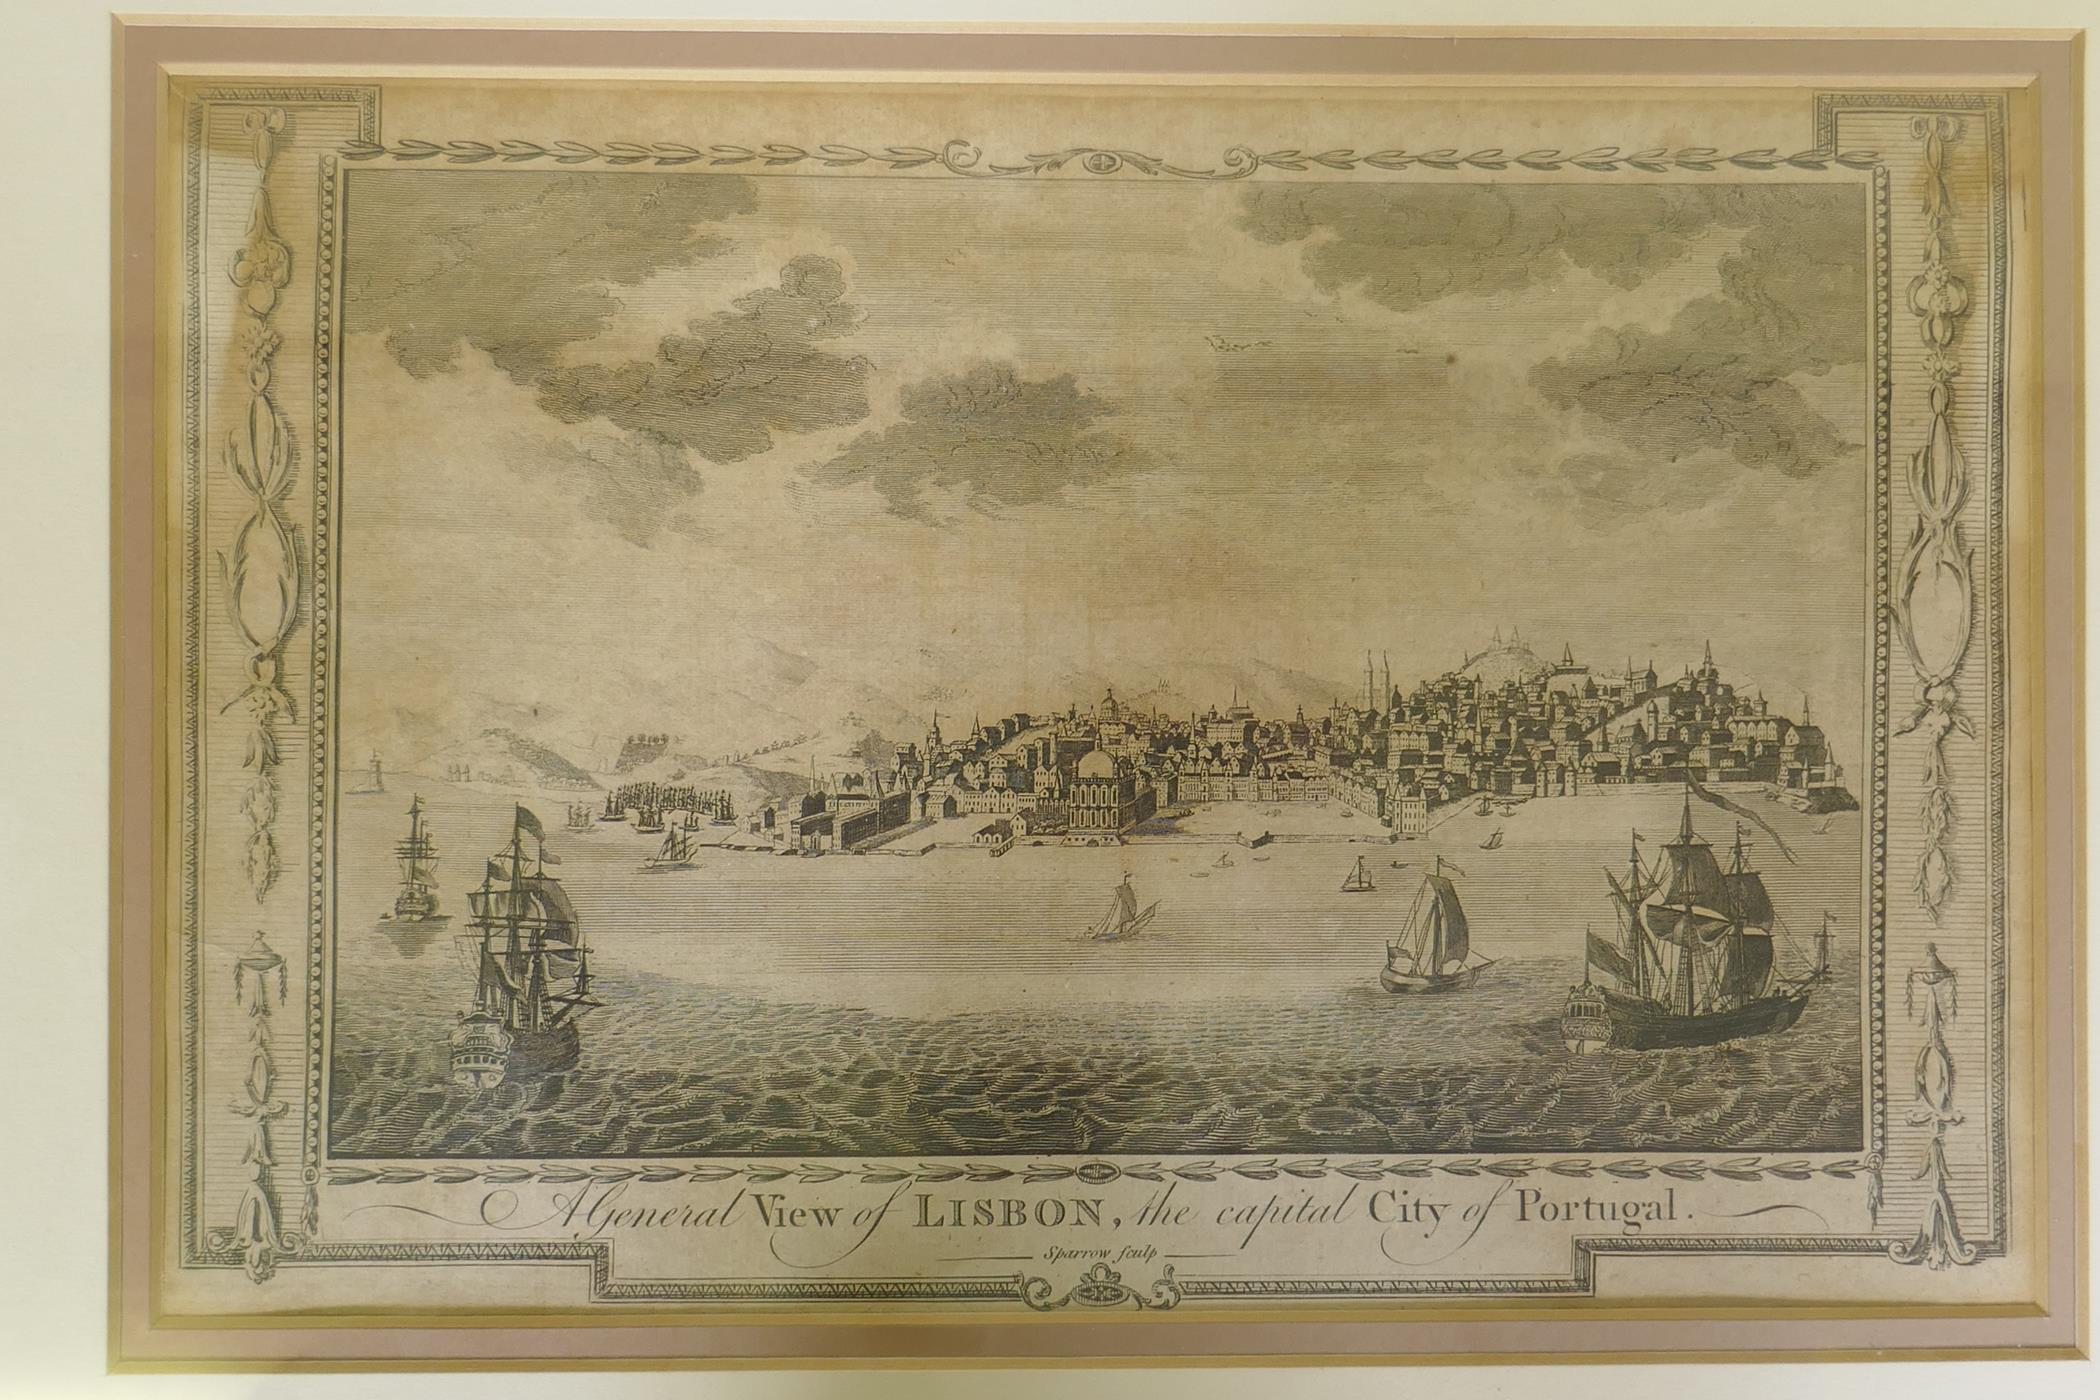 C18th engraving, A General View of Lisbon, the capital of Portugal, engraved by Thomas Sparrow, c. - Image 2 of 6